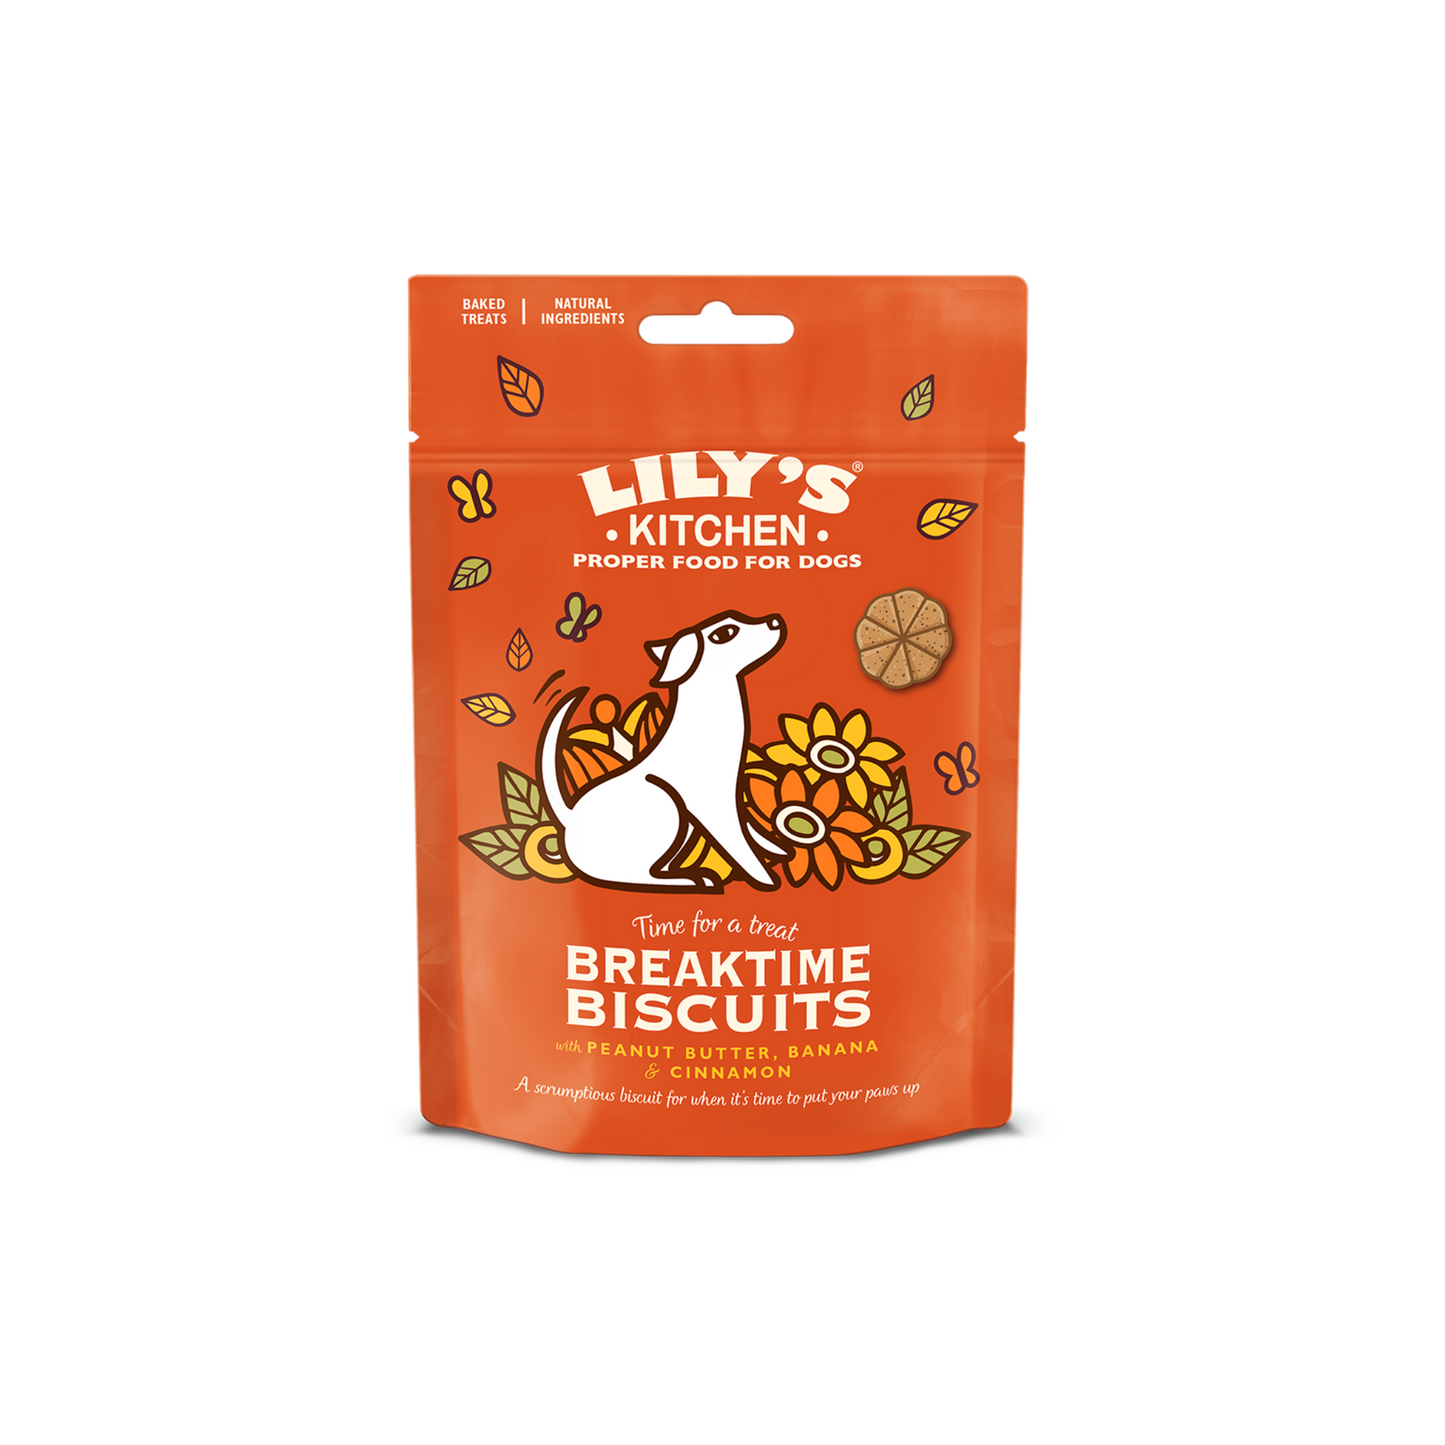 Lilys Kitchen Breaktime Biscuits for Dogs 80g